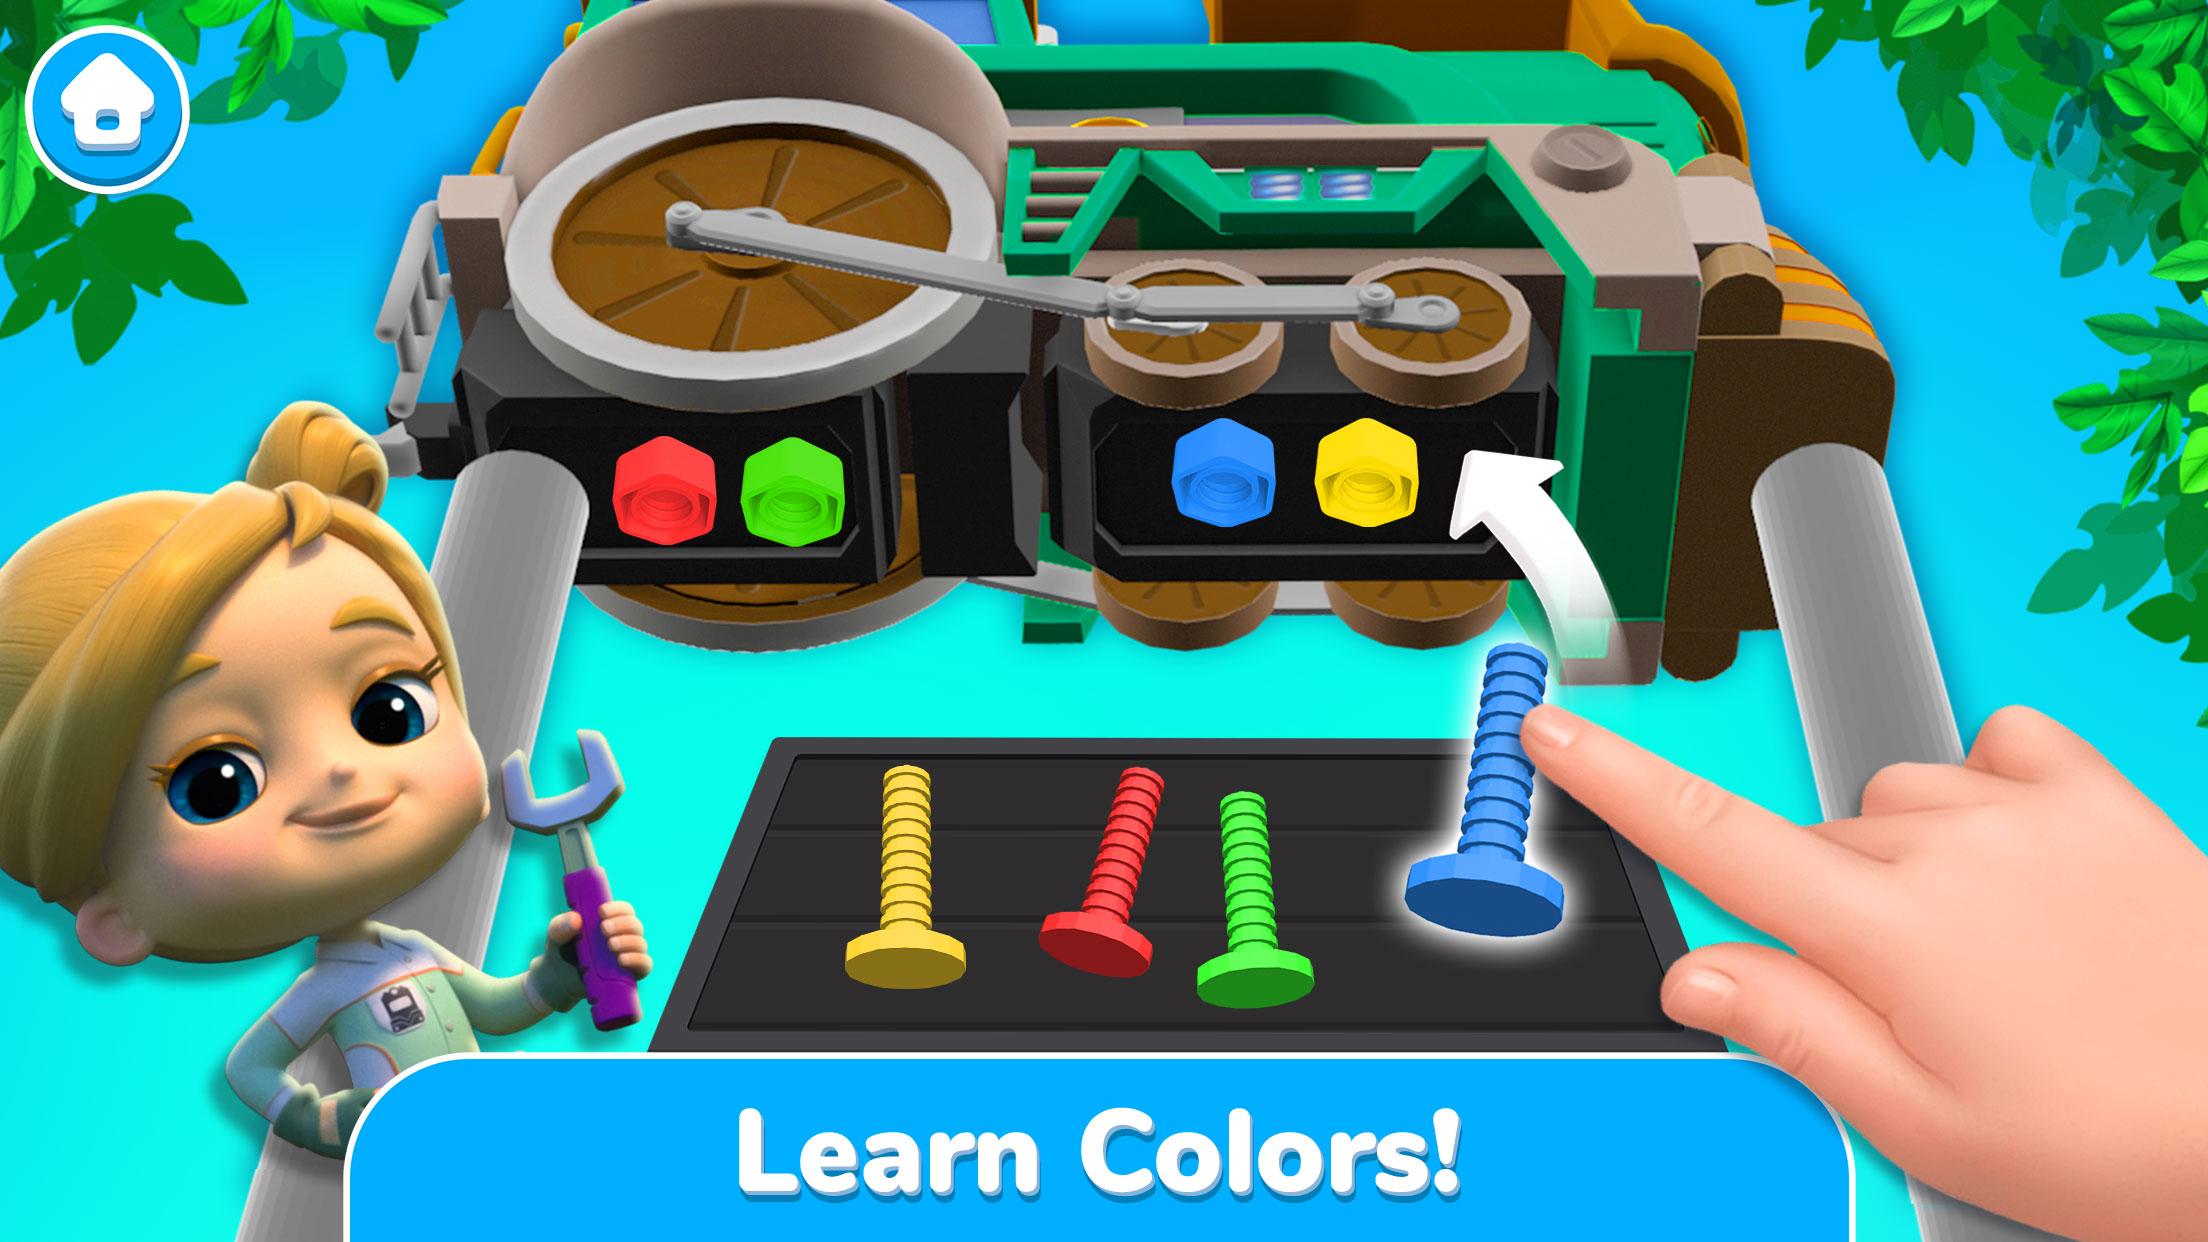 Mighty Express Play & Learn with Train Friends 1.3.1 Screenshot 3